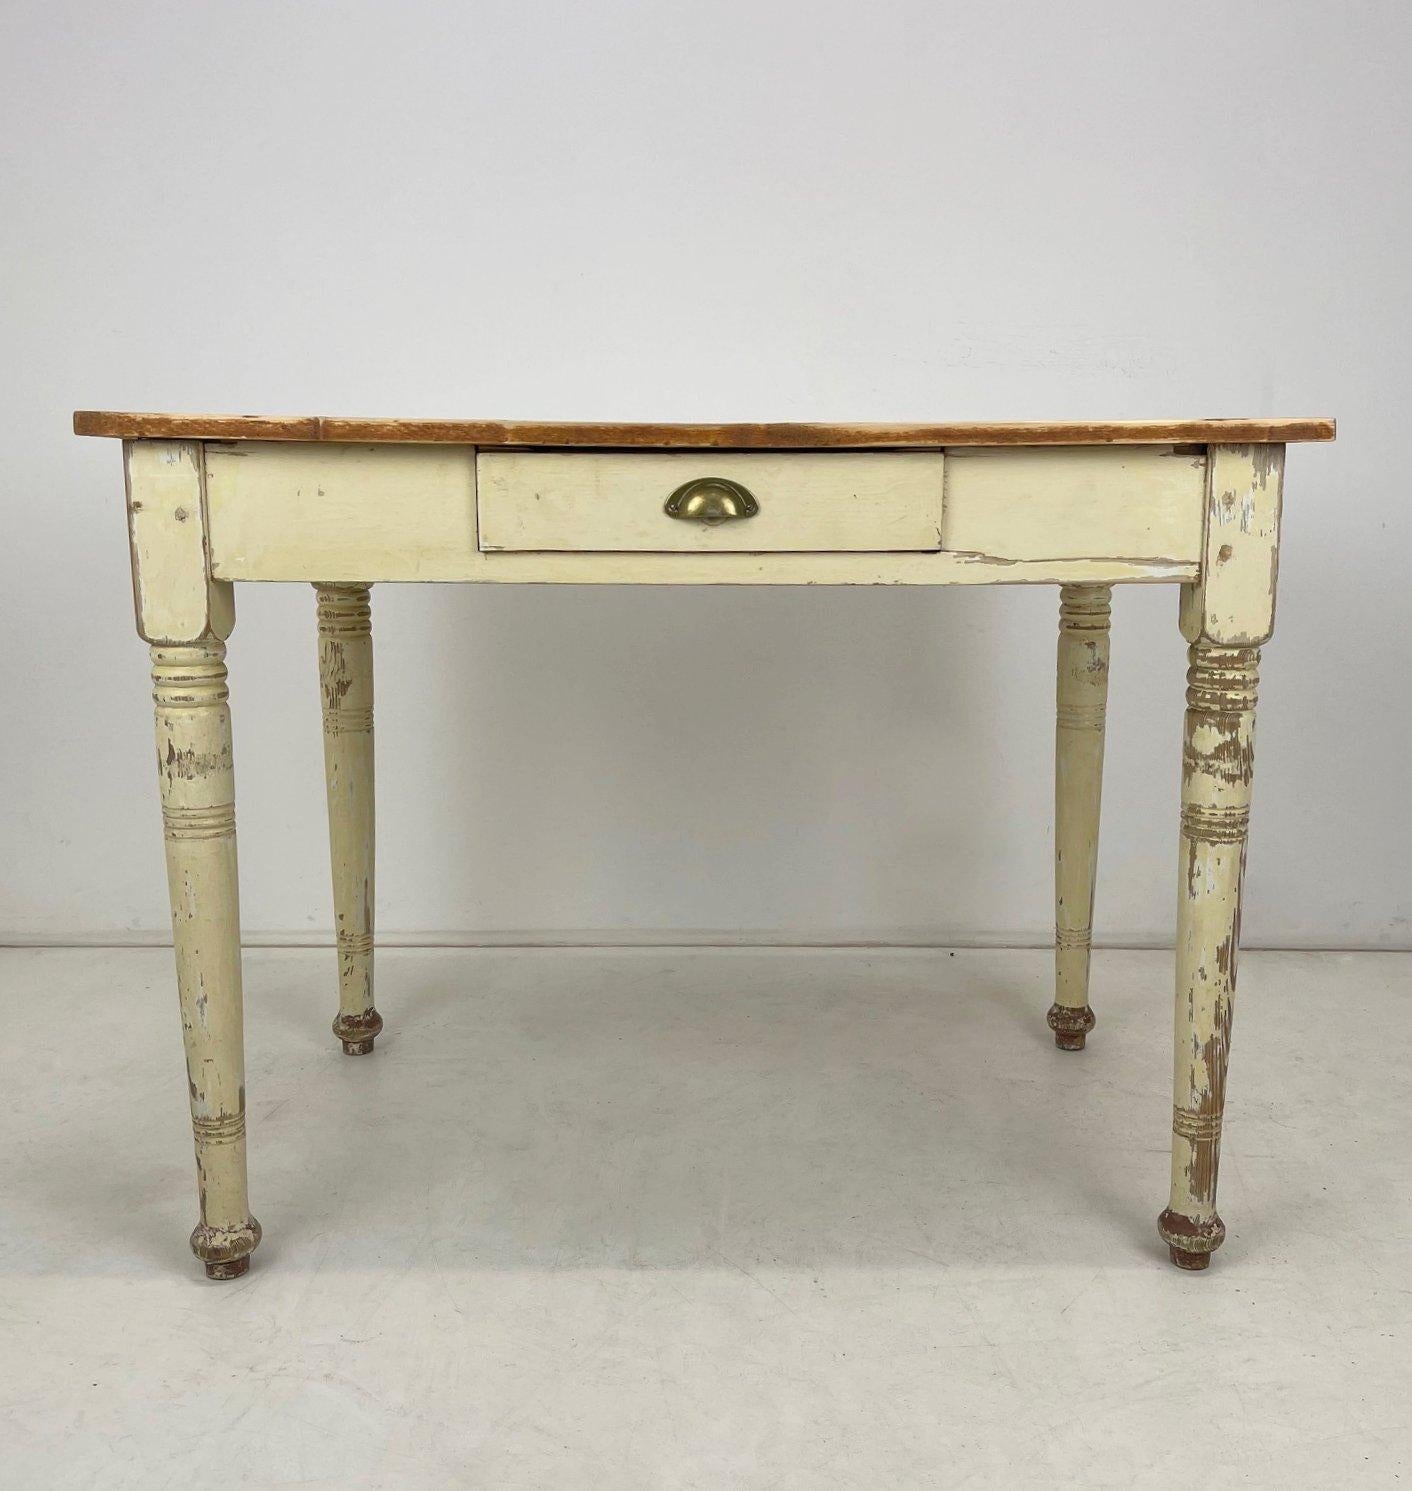 Beautiful table or desk from early 20th century with one drawer. The whole desk was sanded, especially the top part, and waxed.